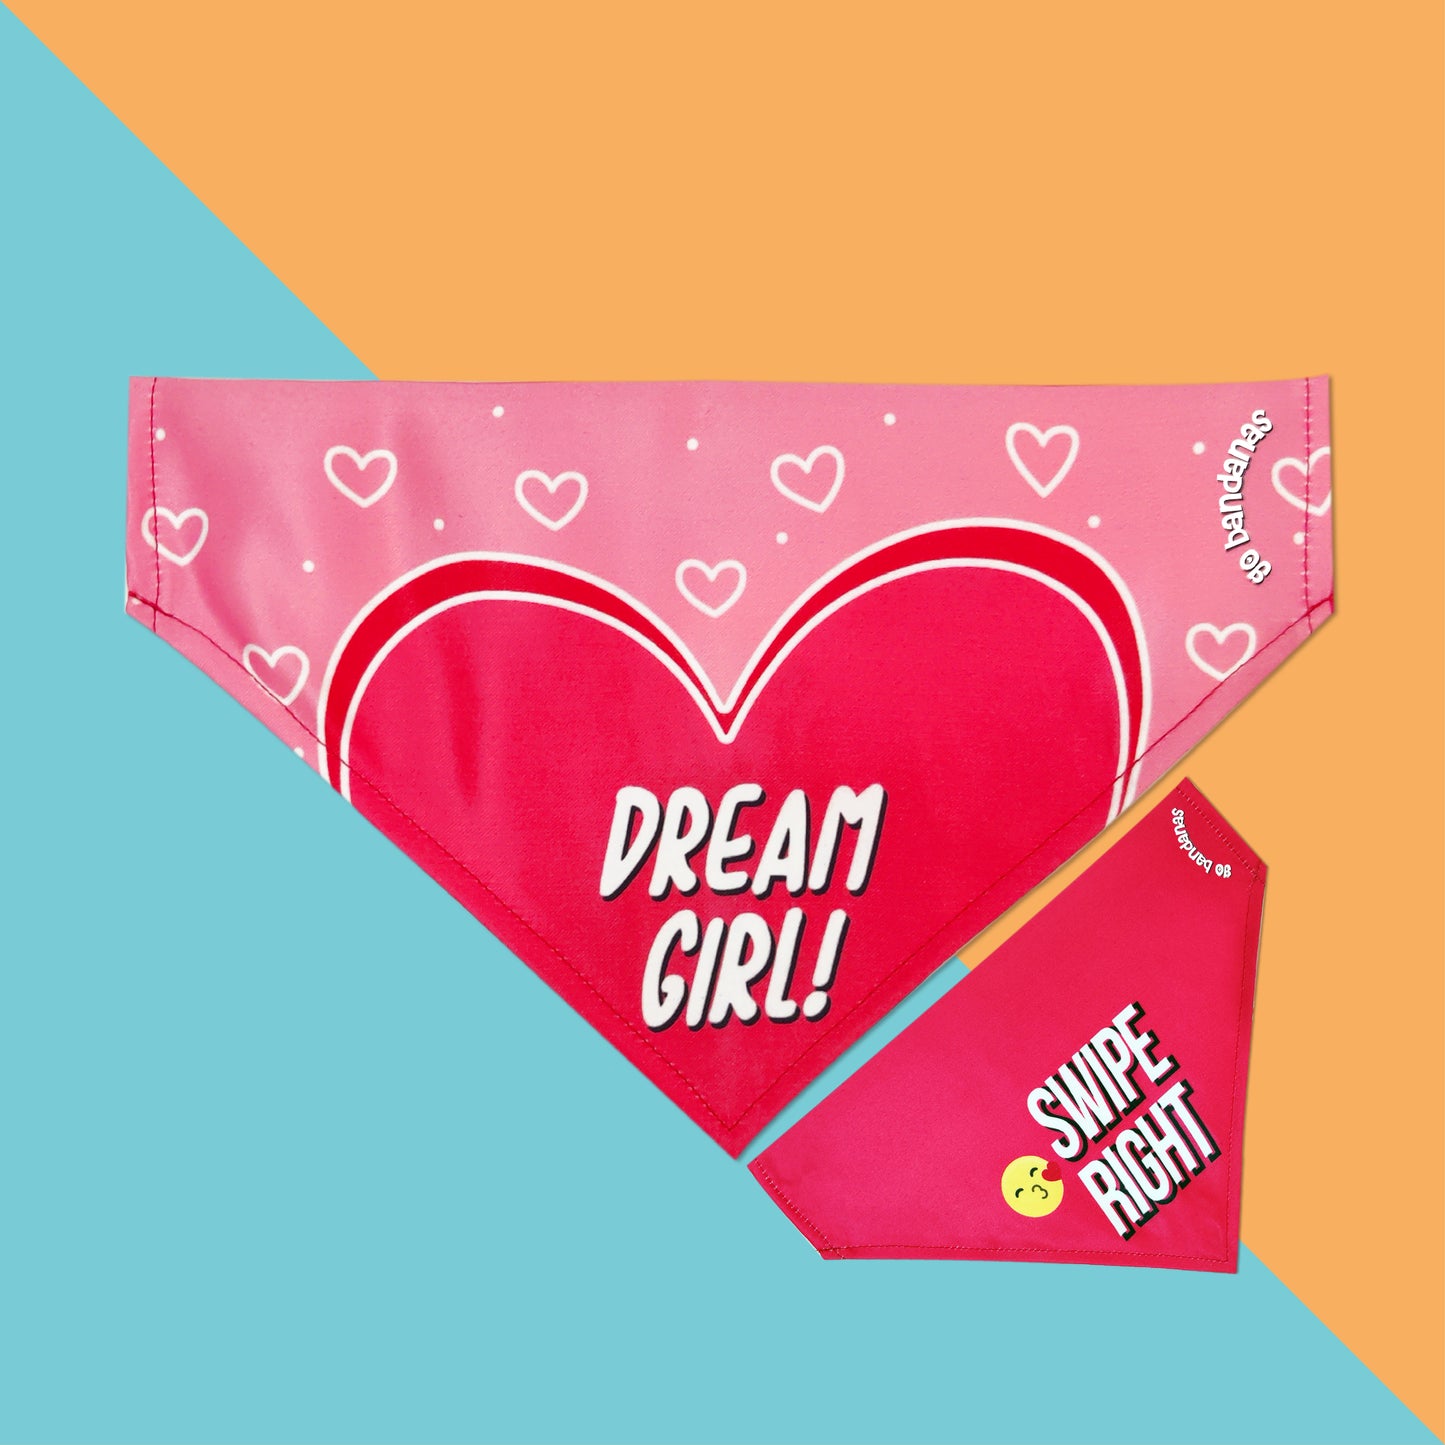 Go Bandanas Reversible Dream Girl (Red) & Tinder Swipe Right (Pink) Adjustable Bandana for Pet Dogs & Cats